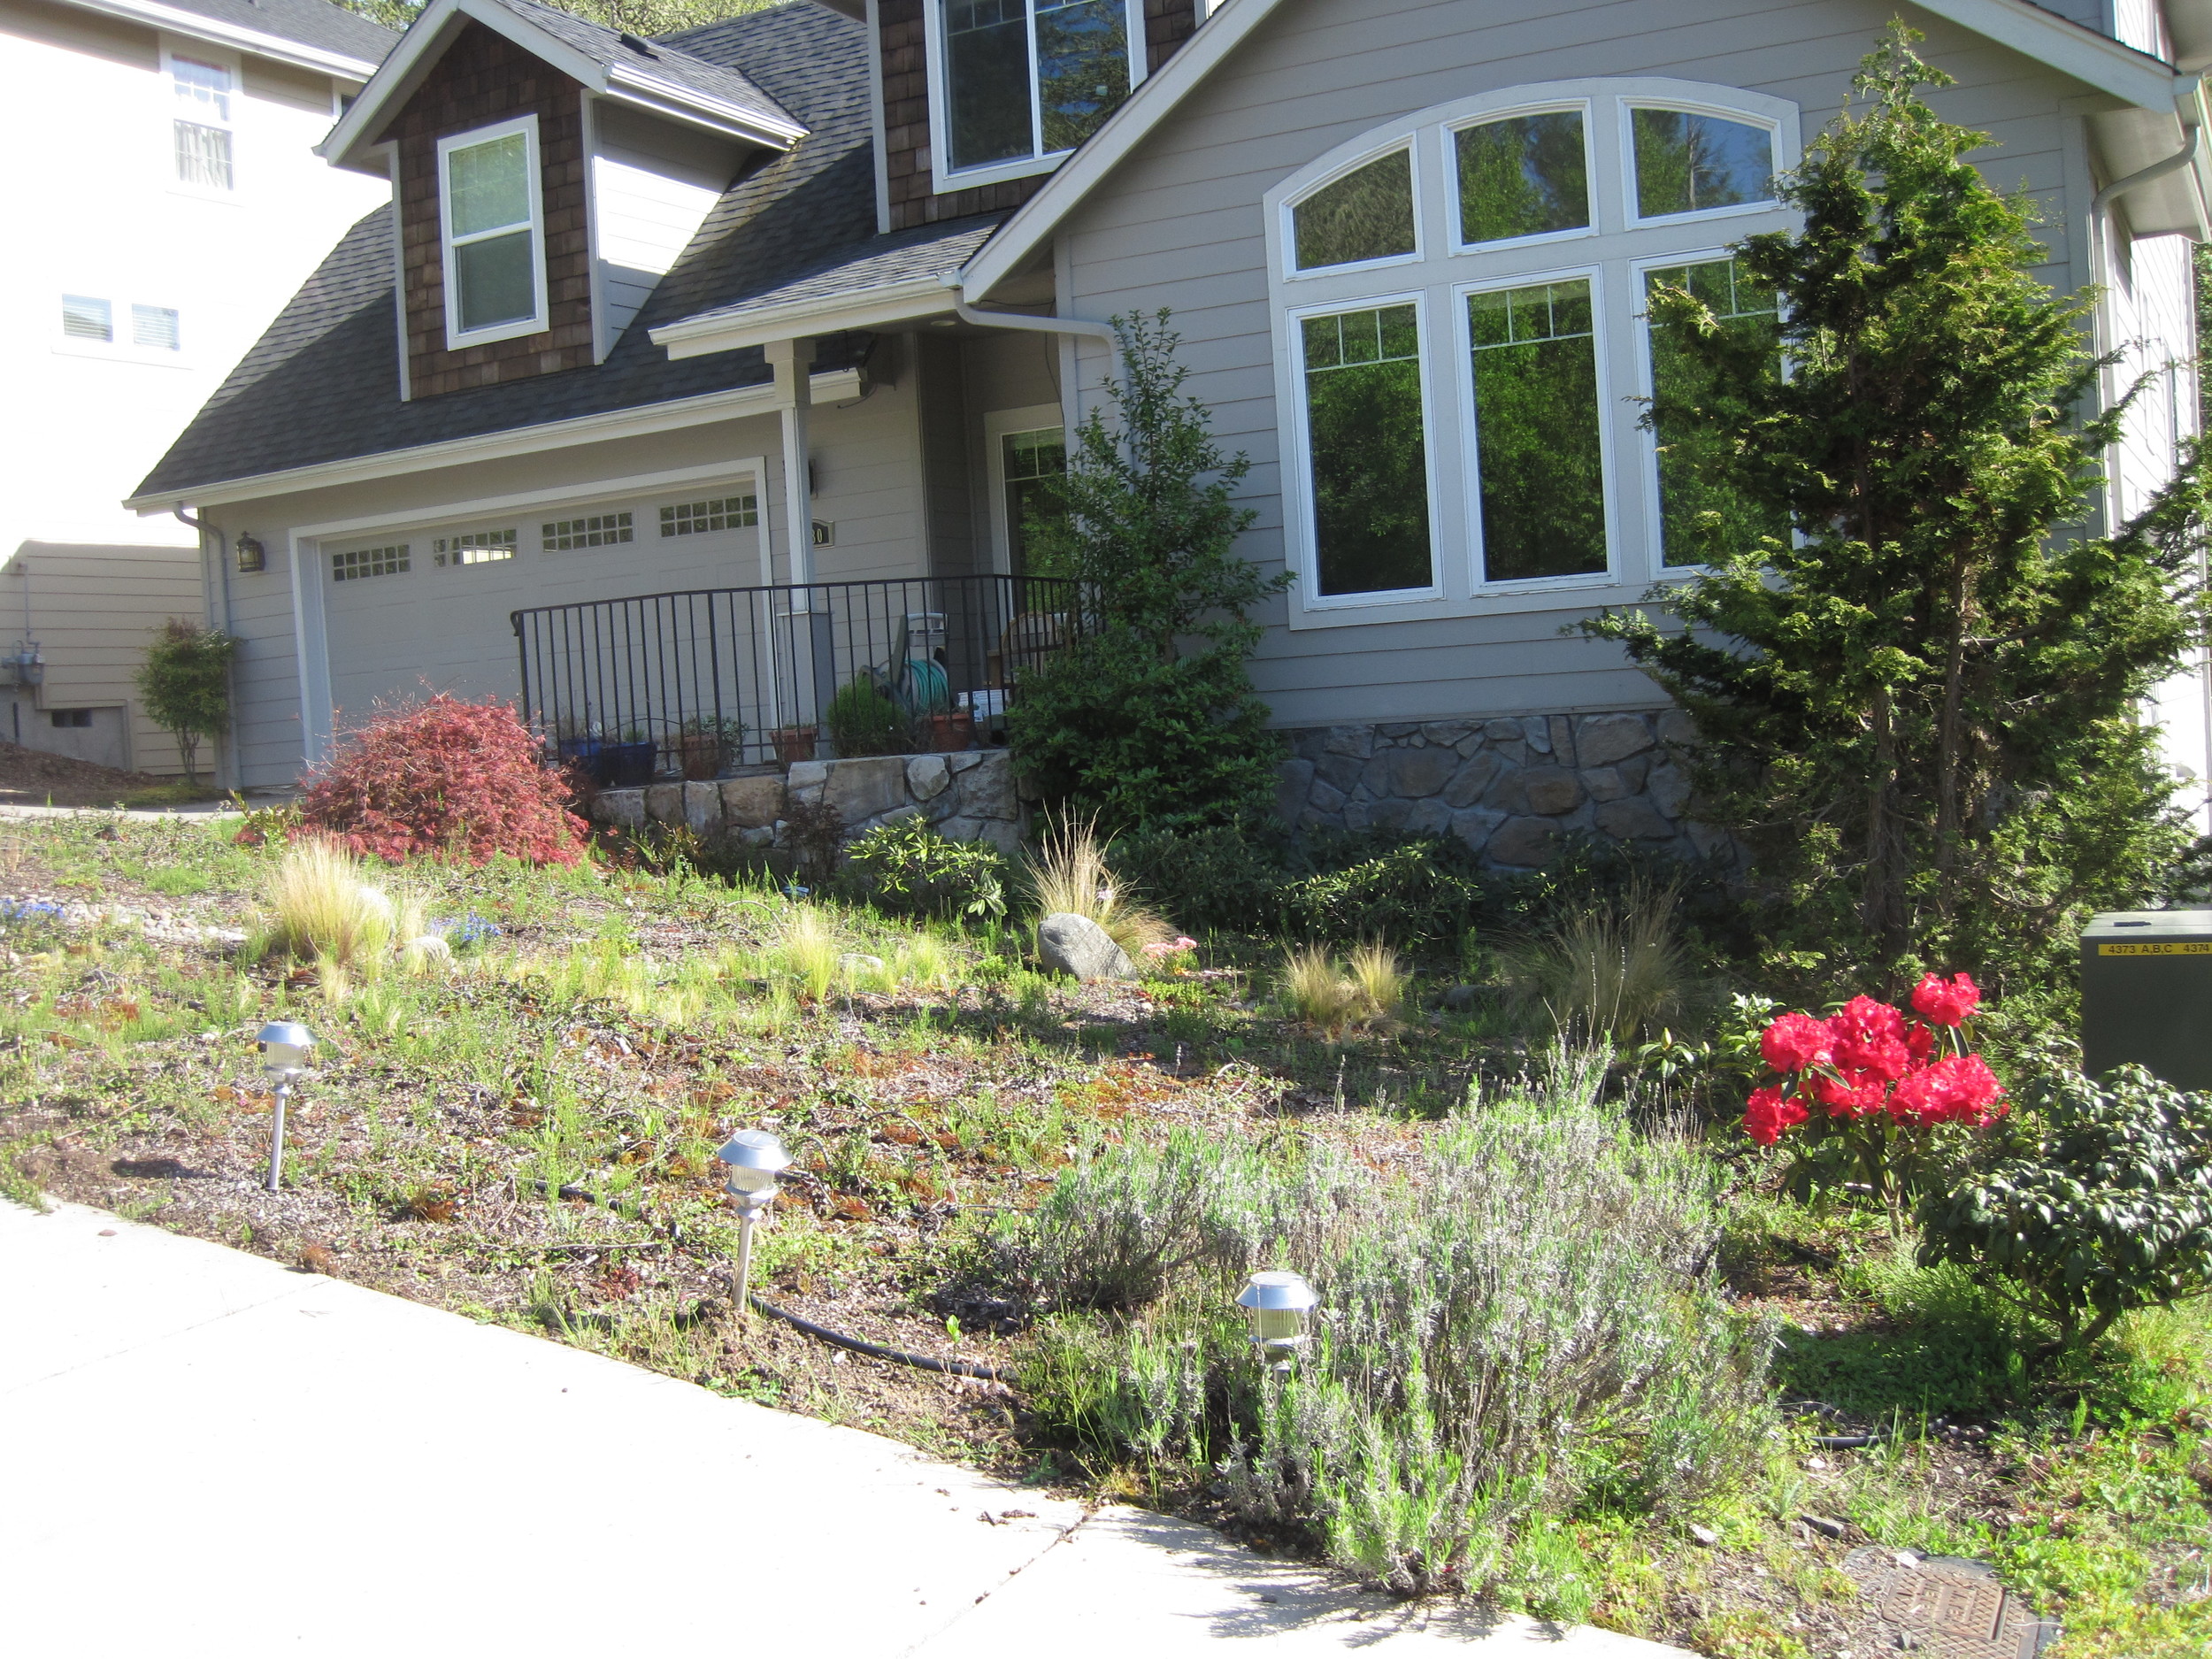  Before: low, sparse plantings were overwhelmed by the facade of the house and the driveway. 